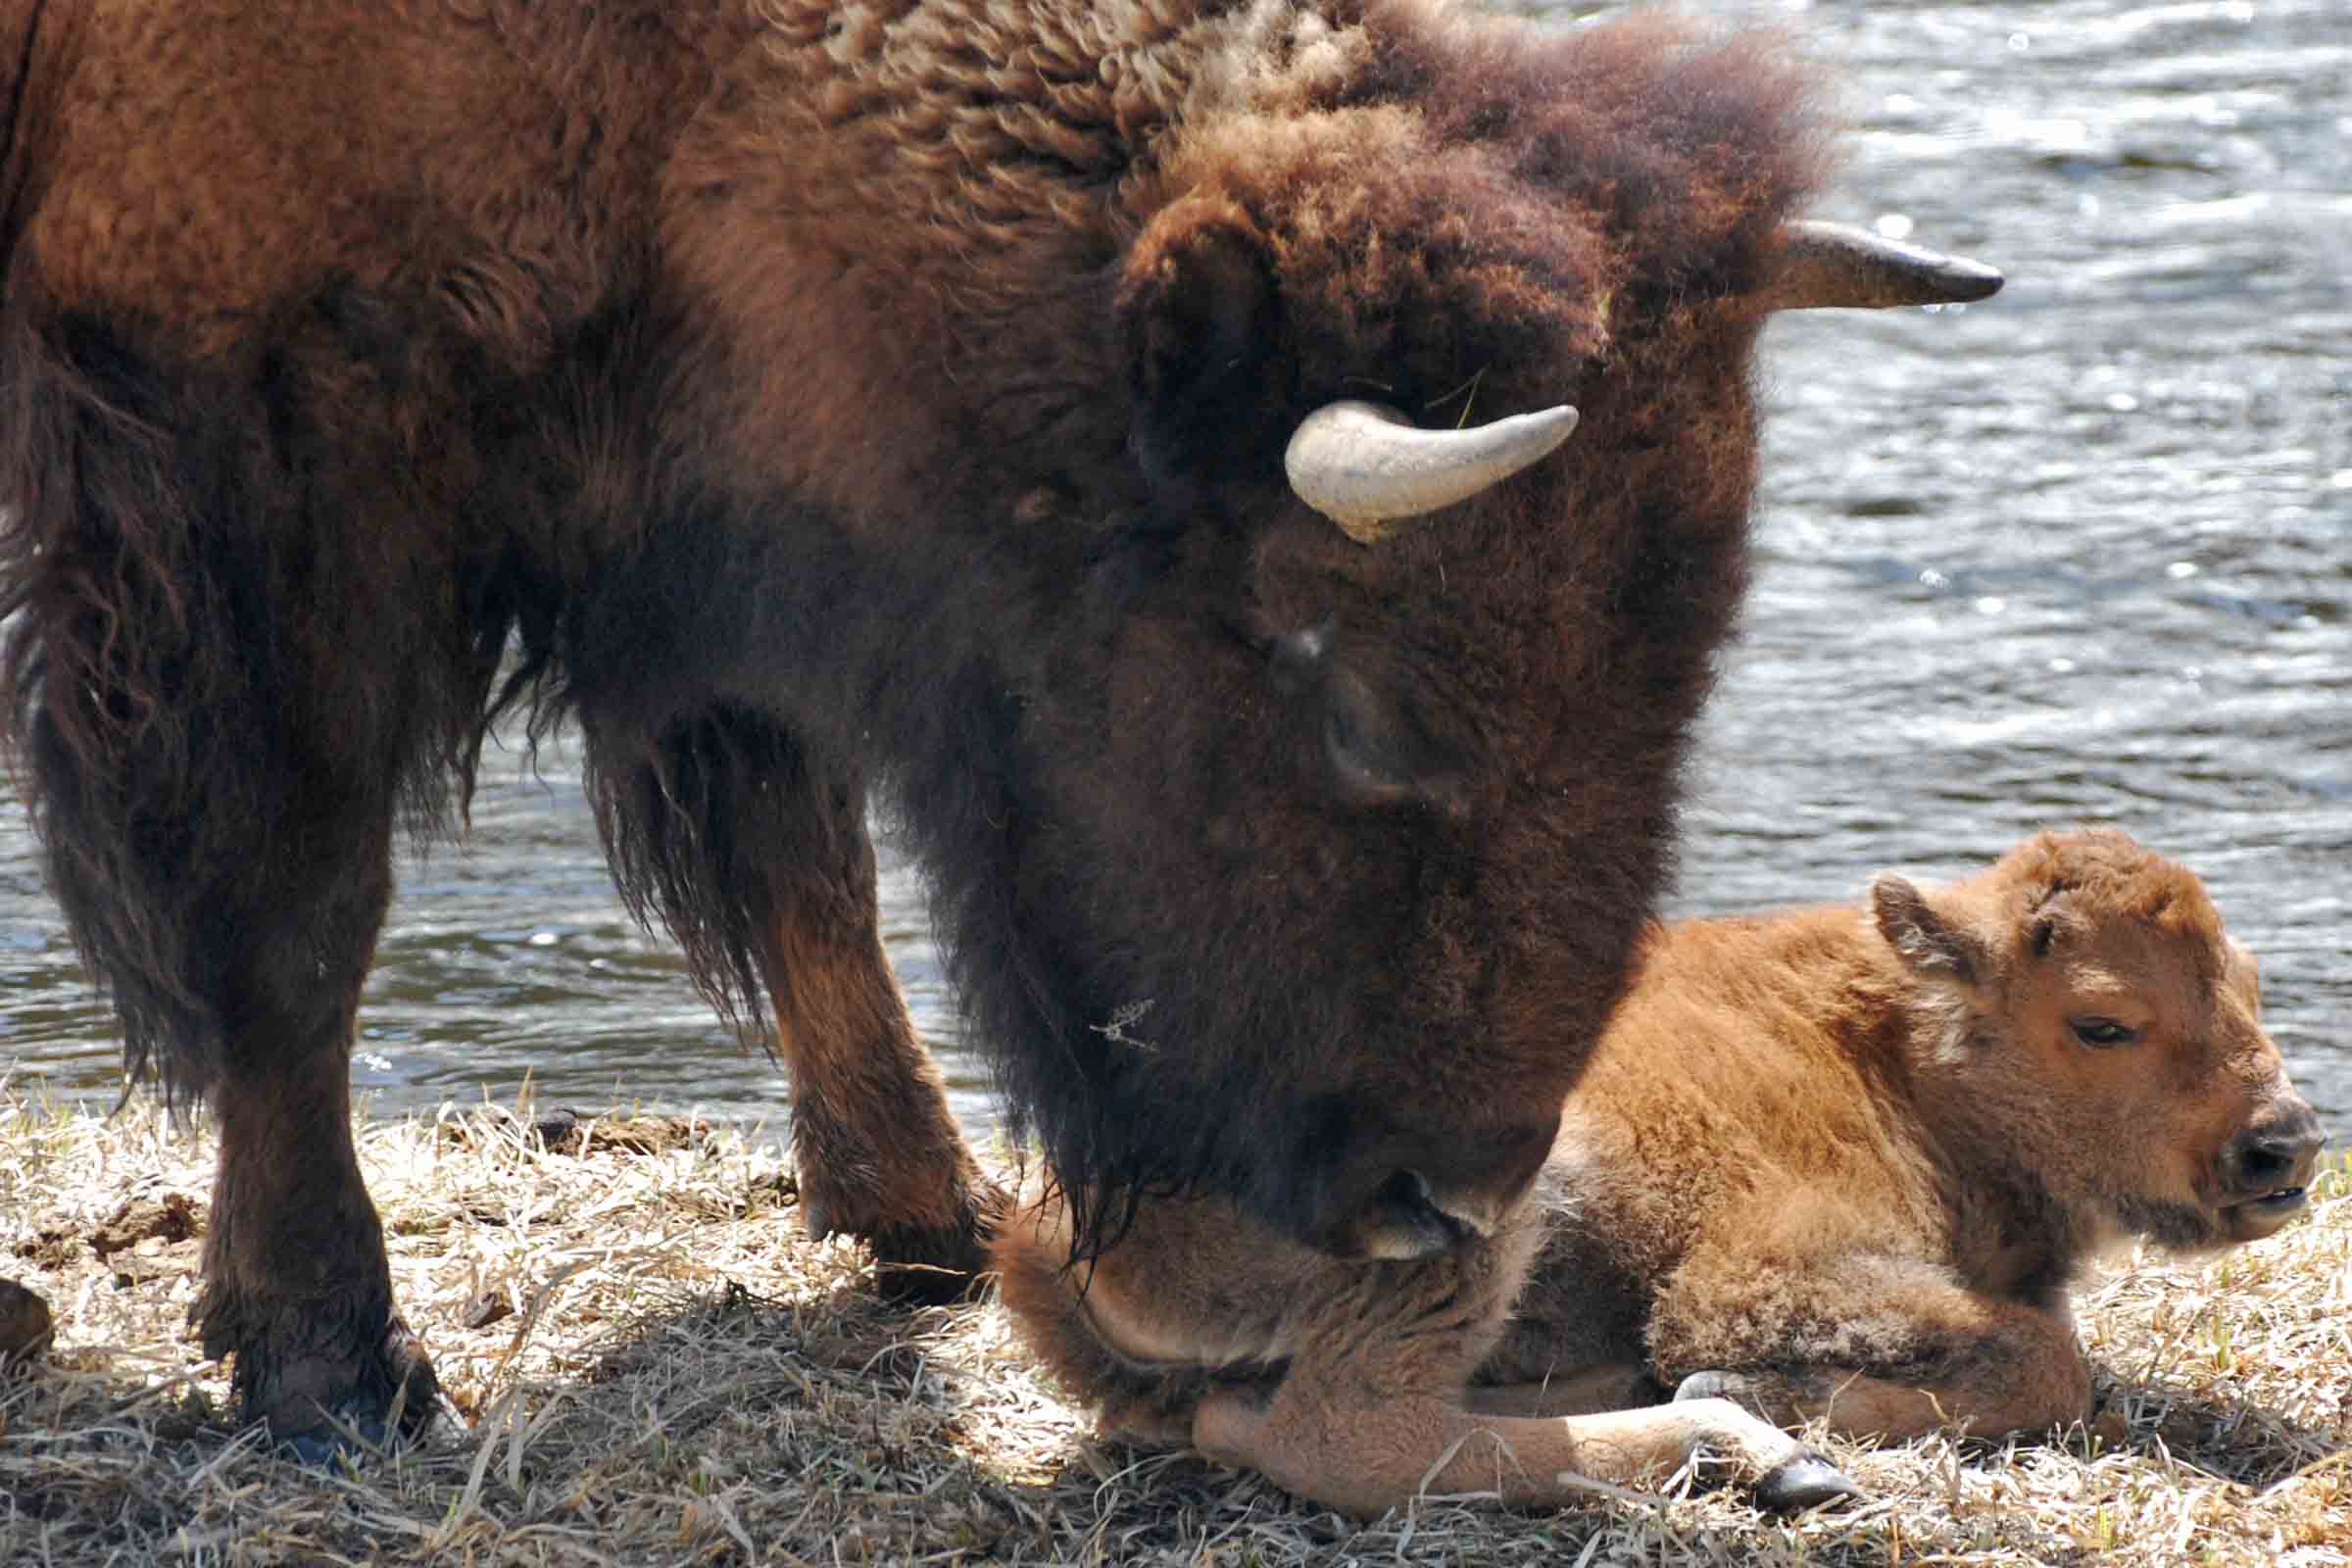 Bison with her calf